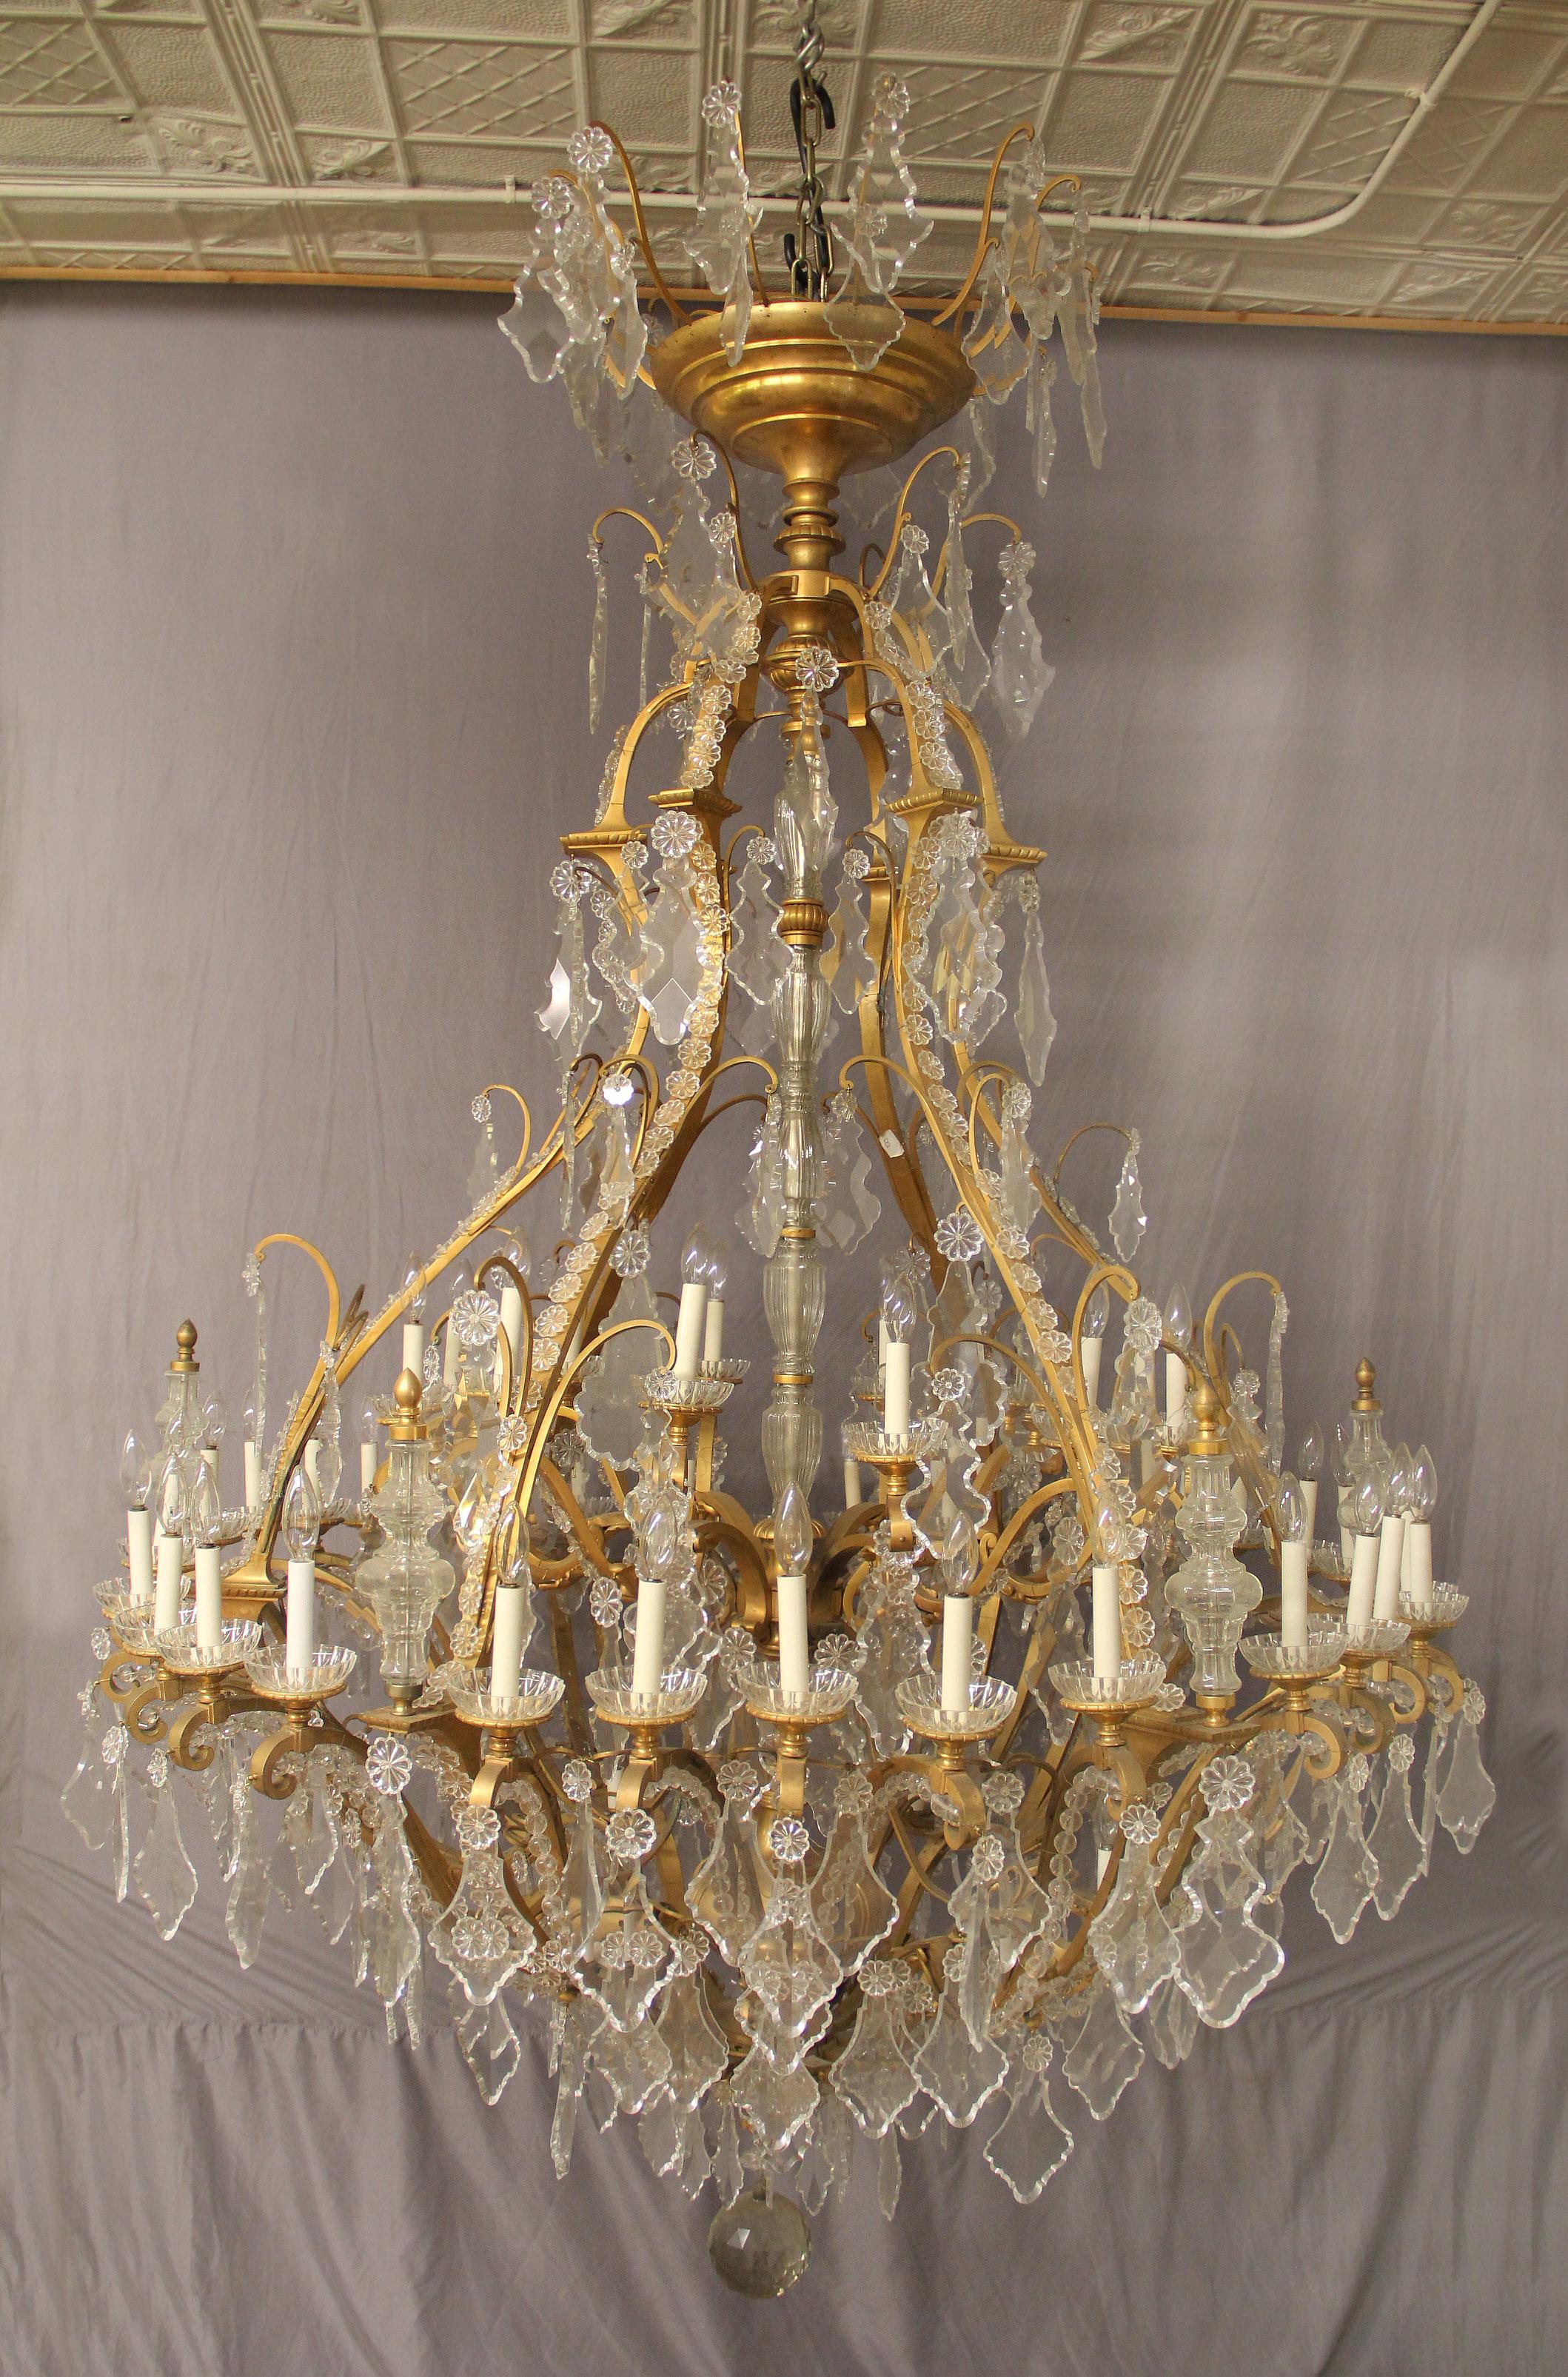 A Very Impressive and Palatial Late 19th Century Gilt Bronze and Cut Crystal Forty Eight light chandelier

The large cage chandelier with multi-faceted and shaped crystals, beaded arms, cut crystal central column leading down to a large gilt bronze